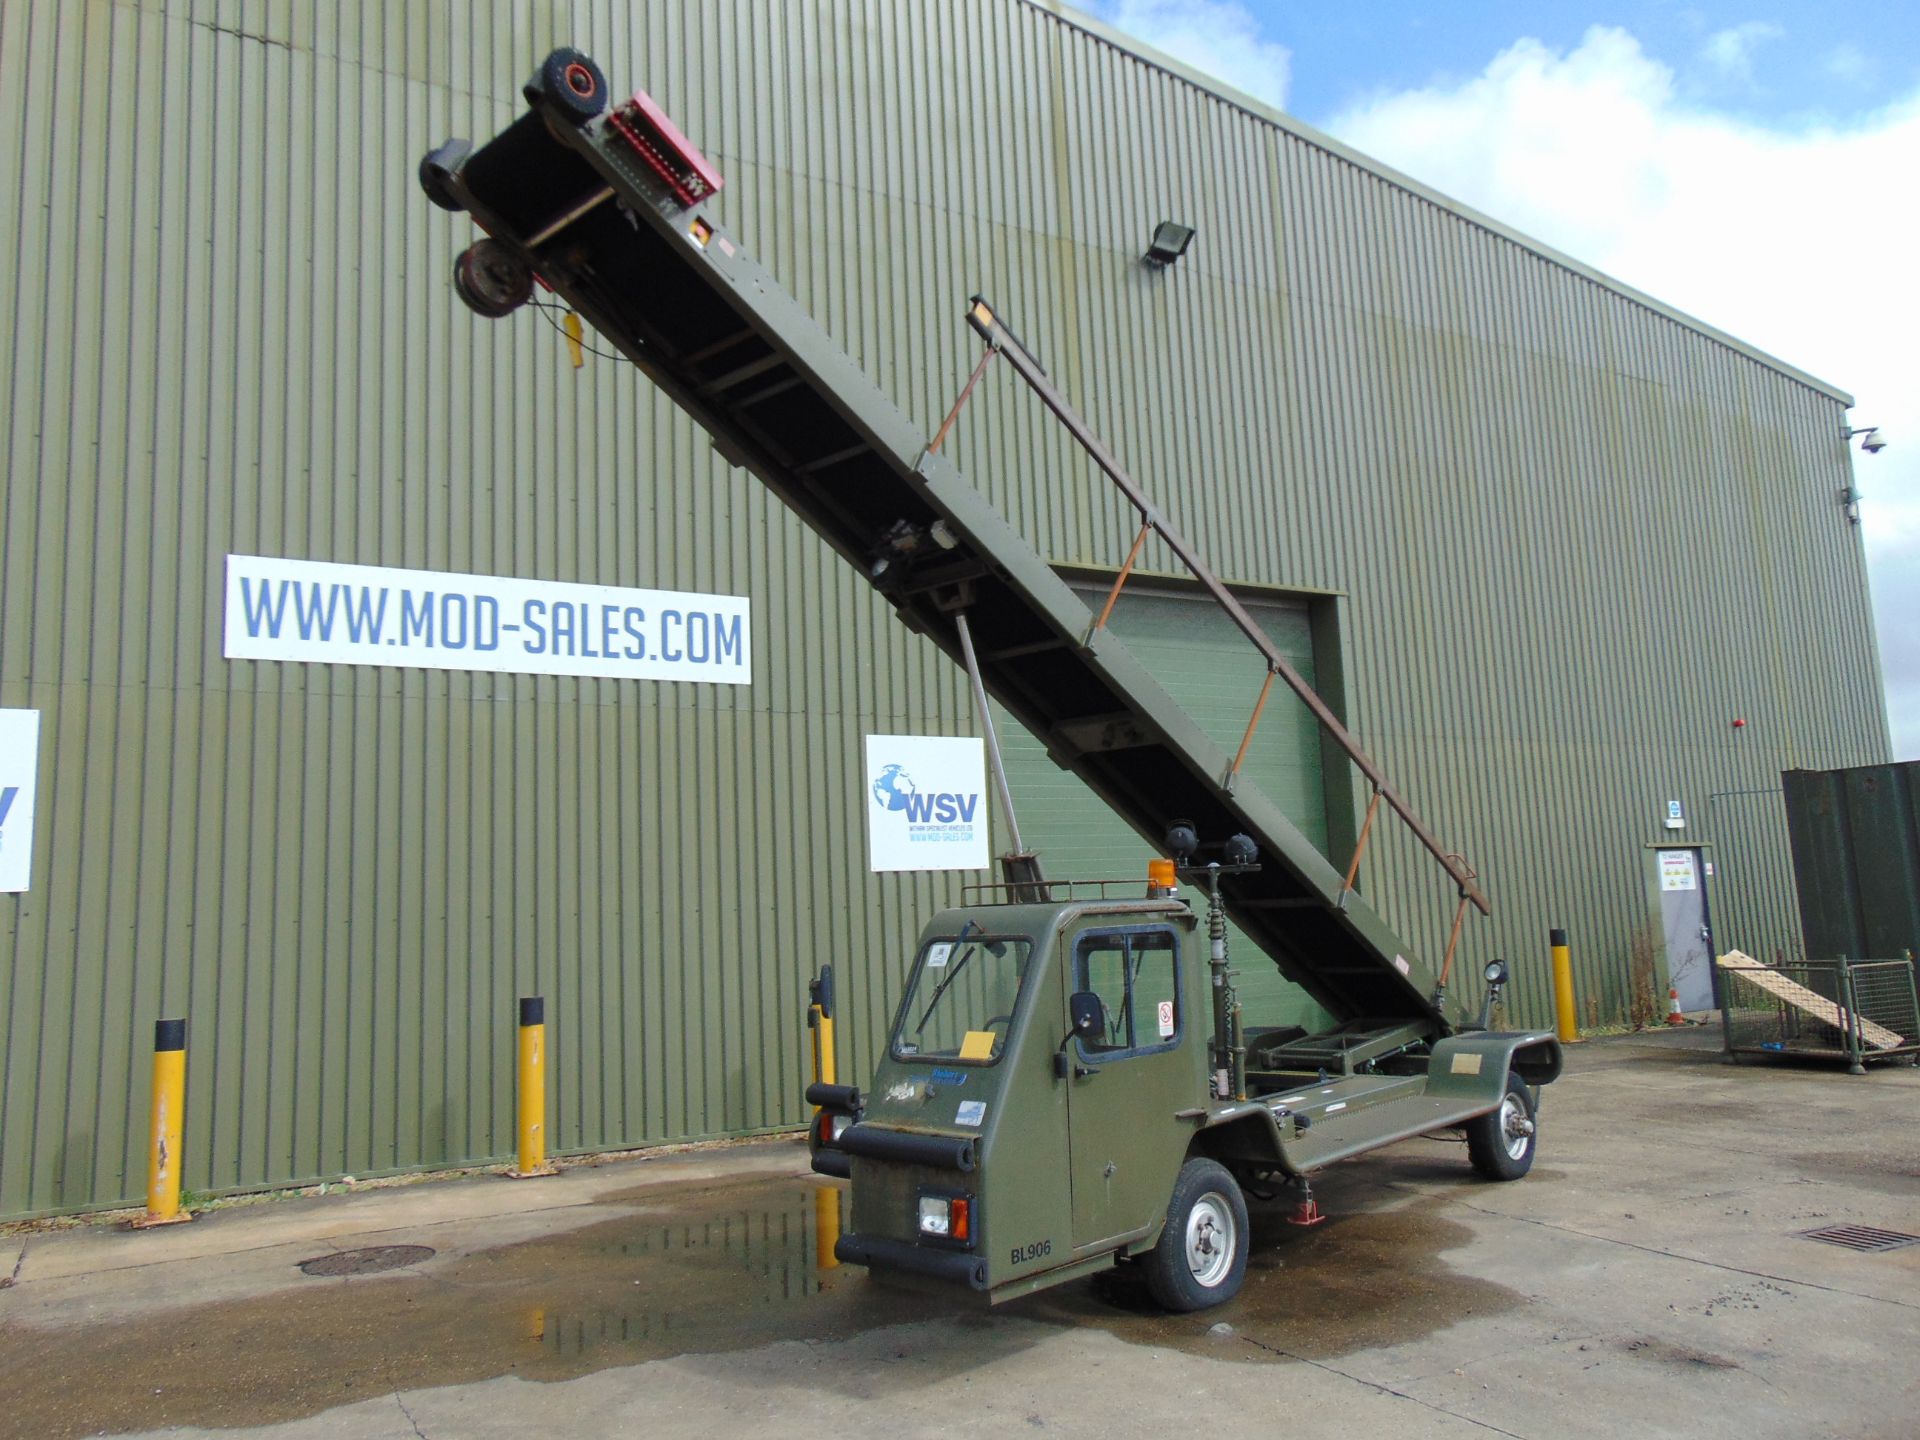 TC888 Self Propelled Aircraft Baggage Conveyor from RAF ONLY 1040 HOURS! - Image 2 of 19